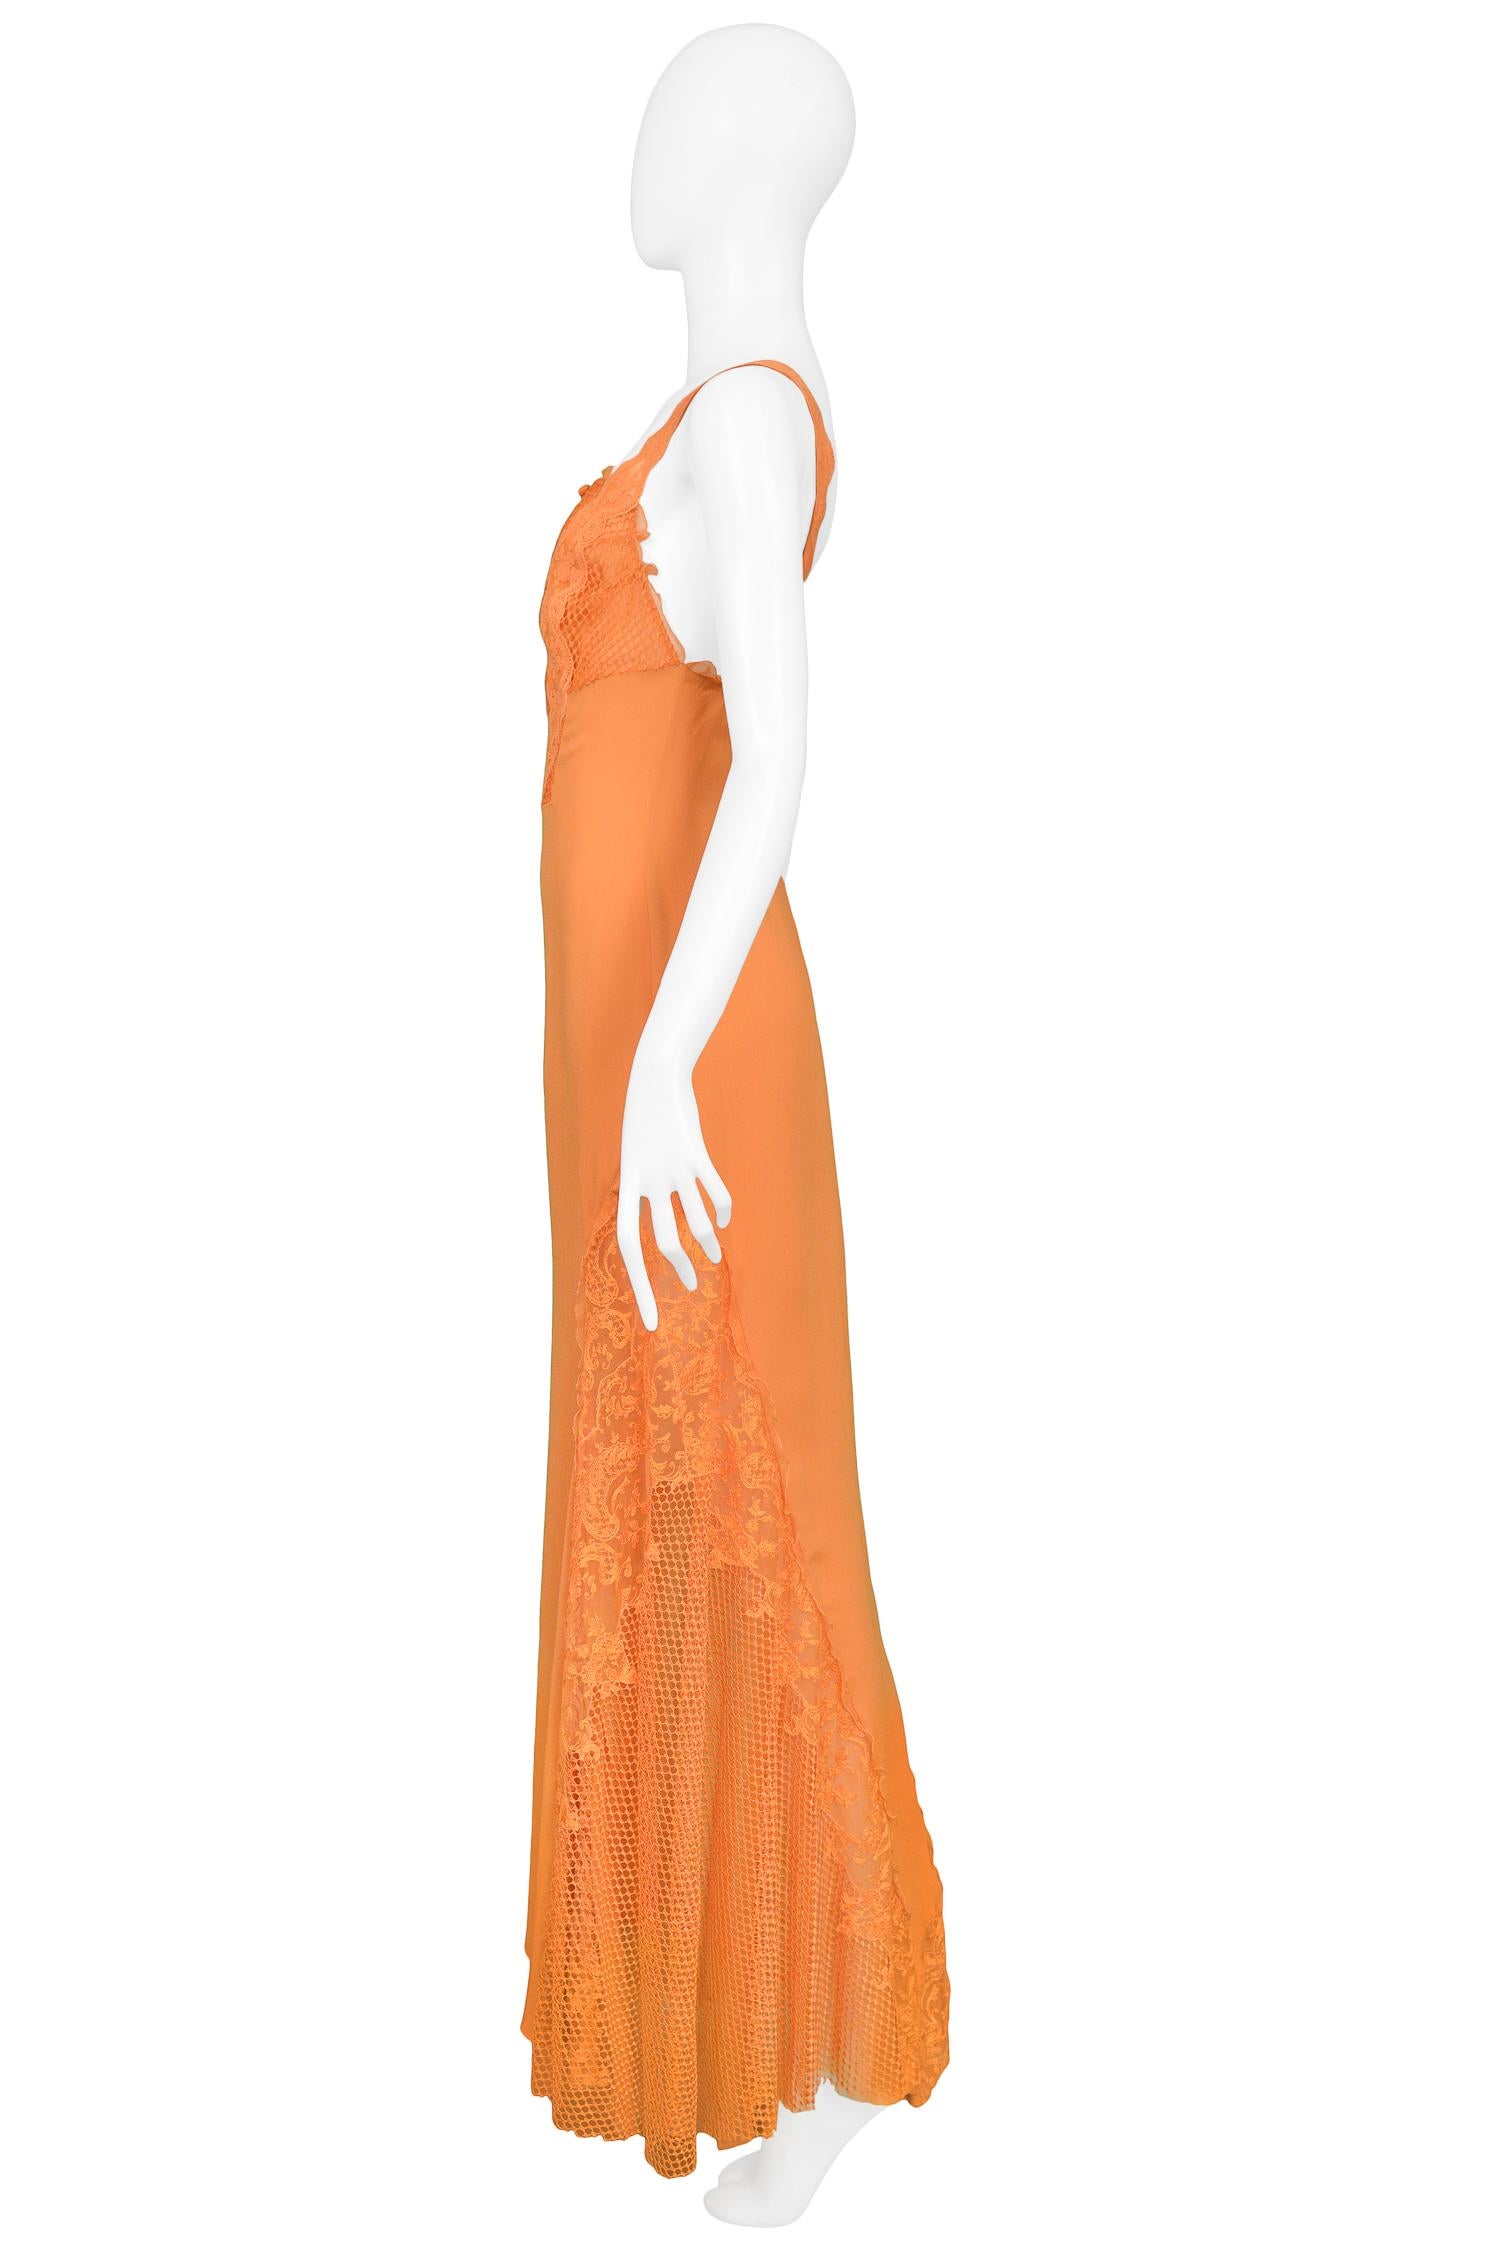 Orange Vintage Gianni Versace Apricot Lace Runway Gown 1997 